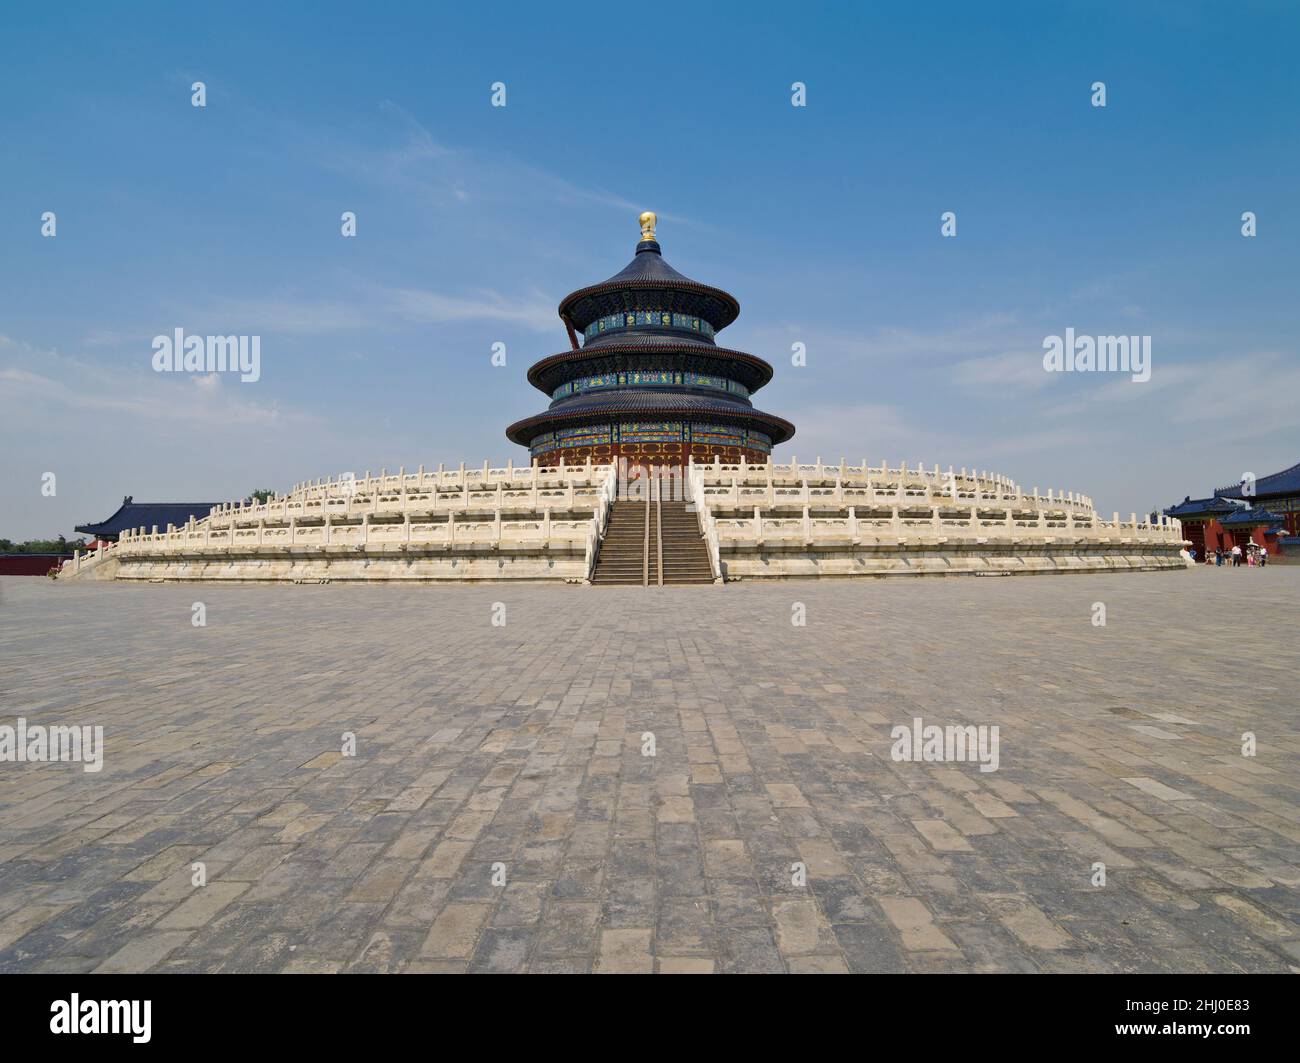 The highlight of the Temple of Heaven is the Hall of Prayer for Good Harvest. The hall was originally built in 1420 based on a model of the Temple of Stock Photo